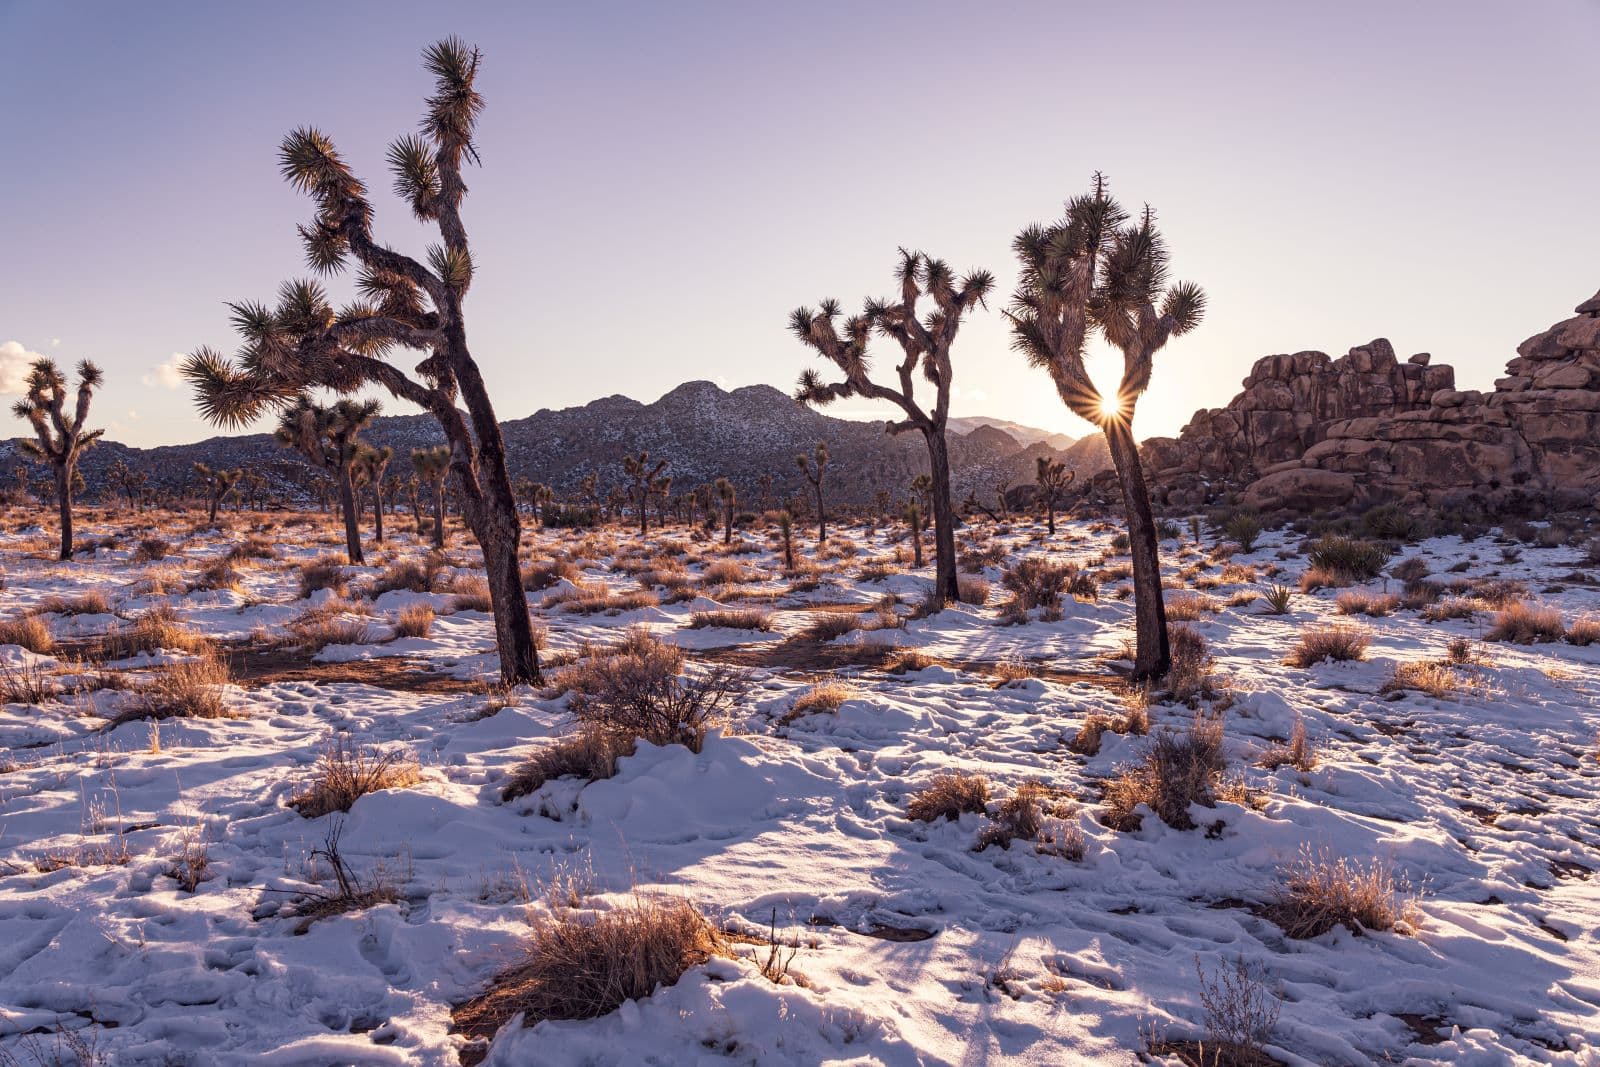 Your Guide to Visiting Joshua Tree National Park in the Winter